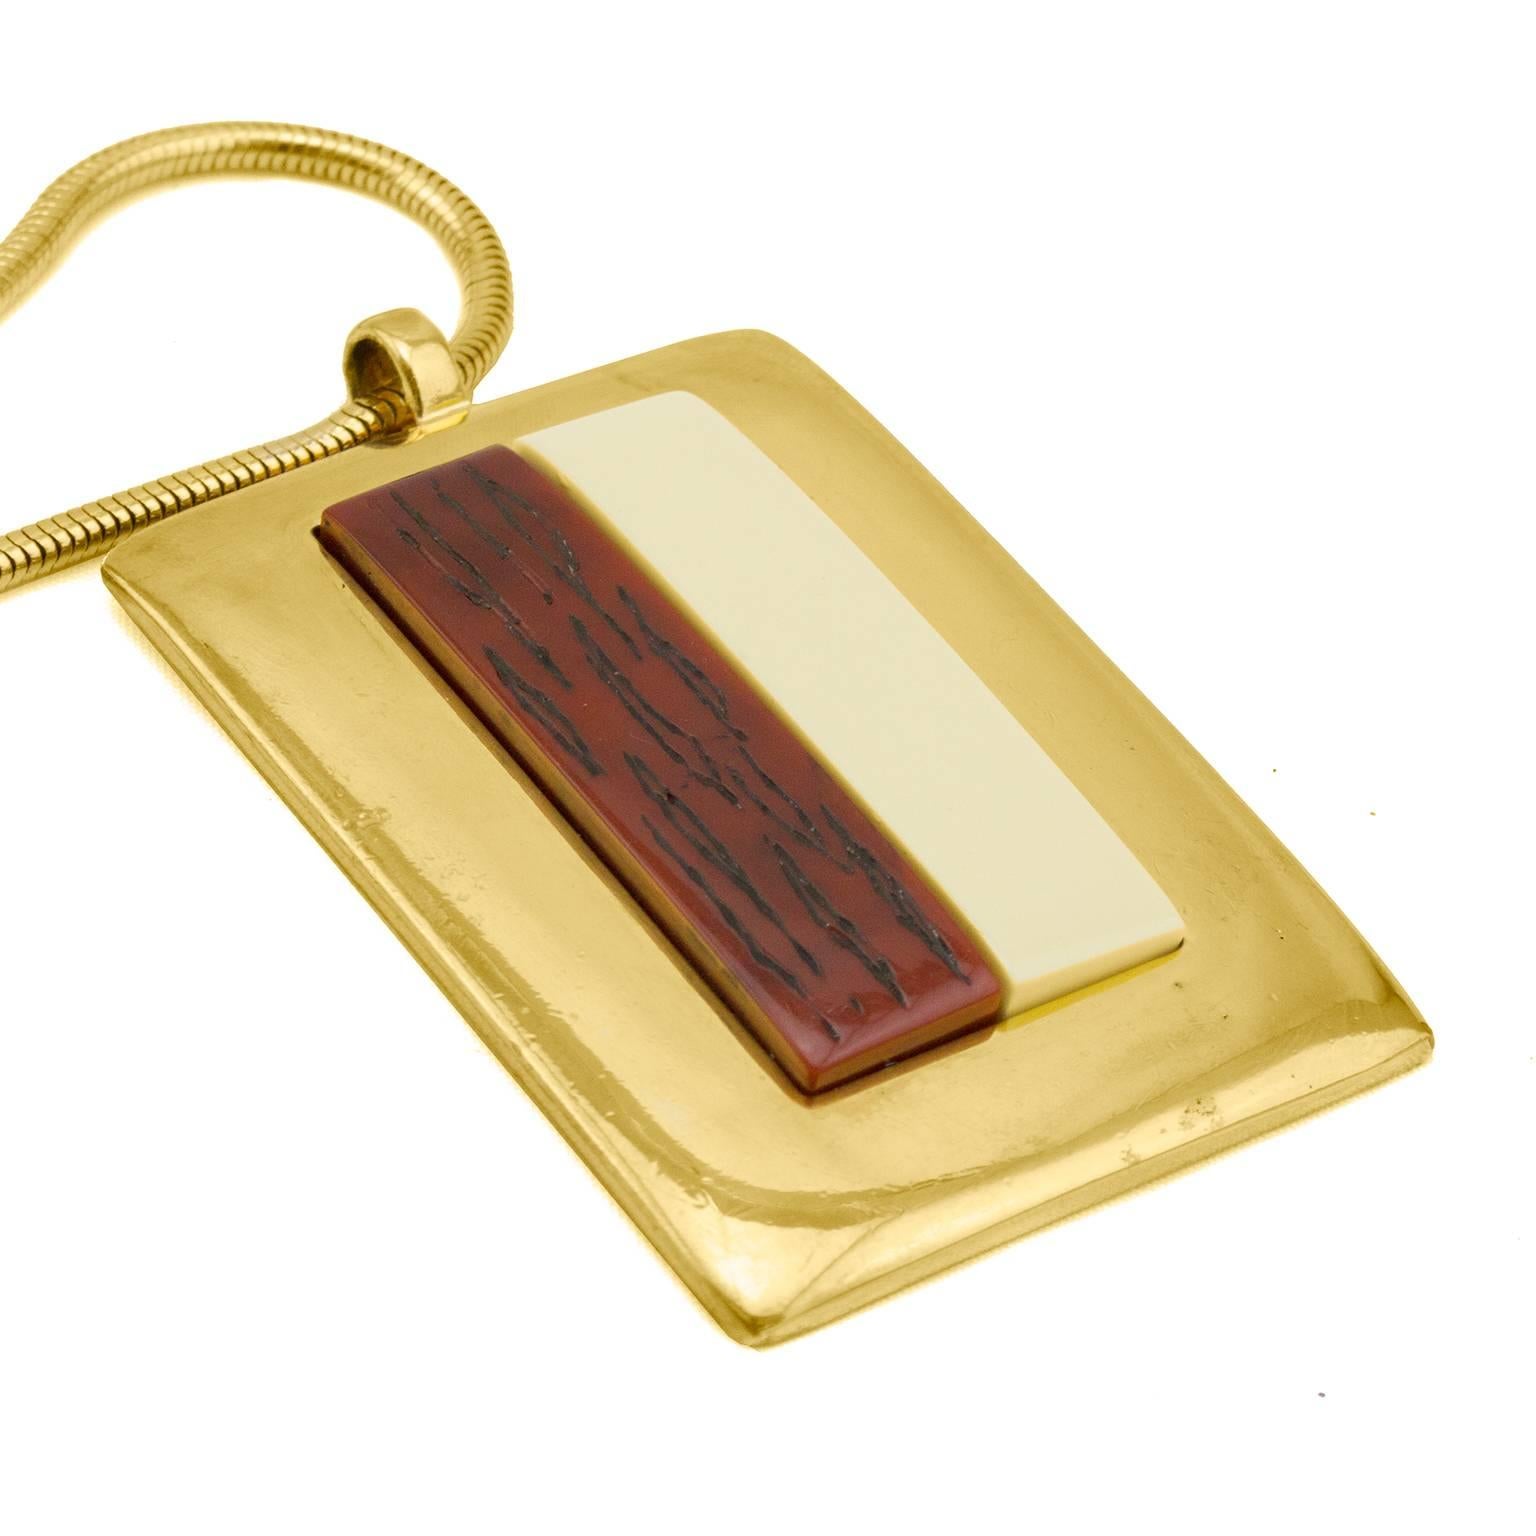 1980s Lanvin gold tone necklace. Large rectangular pendant with a cream and faux wood detail. Small lobster clasp closure. Brand stamping on back. Very good vintage condition, minor wear throughout due to age. 

Length 15